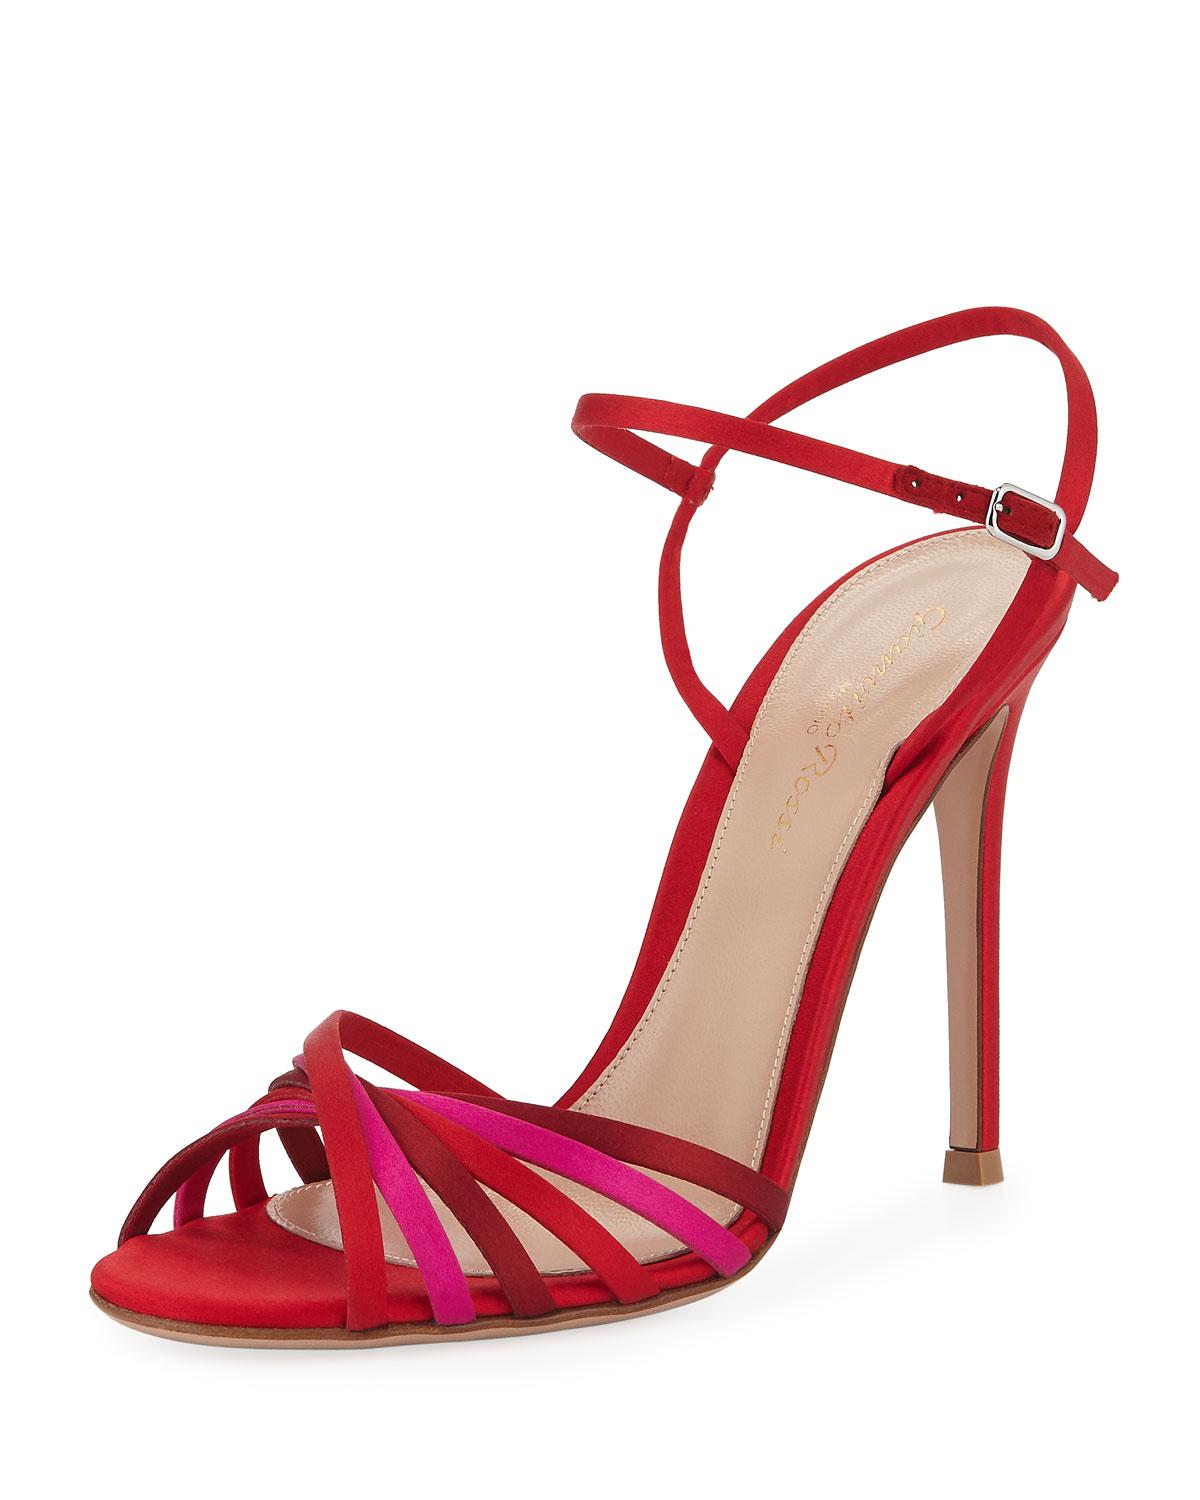 Lyst - Gianvito rossi Strappy Satin 105mm Sandal in Red